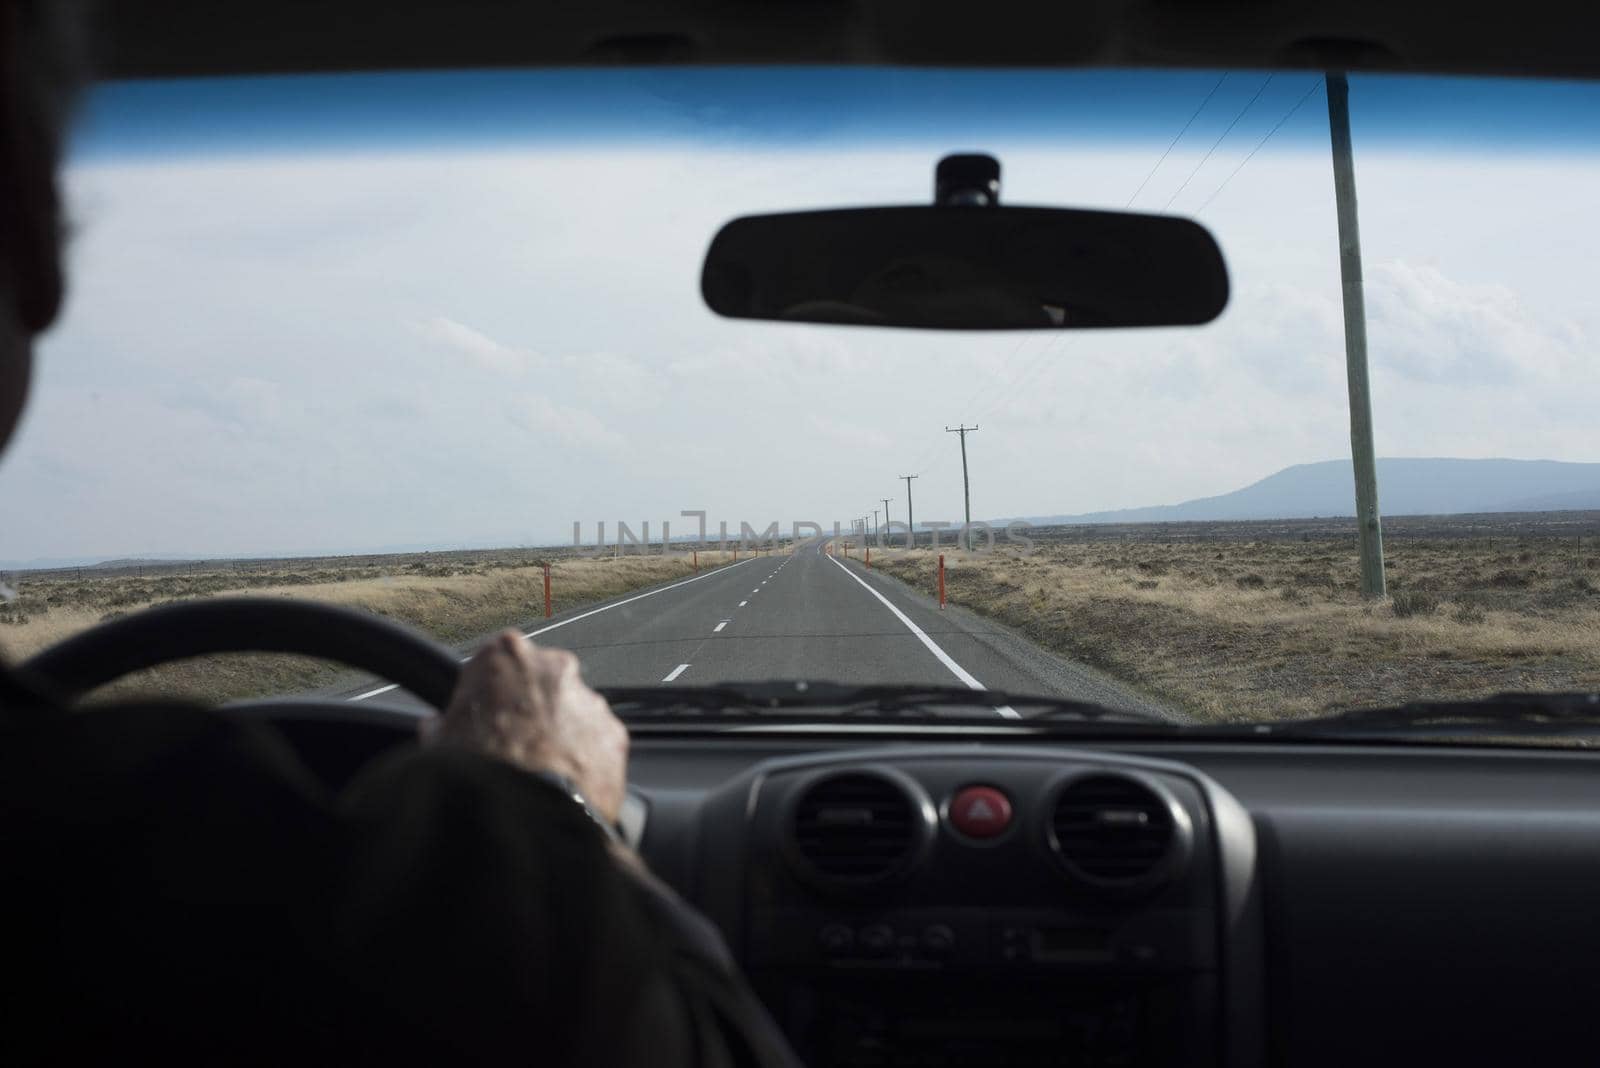 Long journey ahead concept with man driving a car in an over the shoulder perspective looking at the long road stretching into the distance through the windscreen